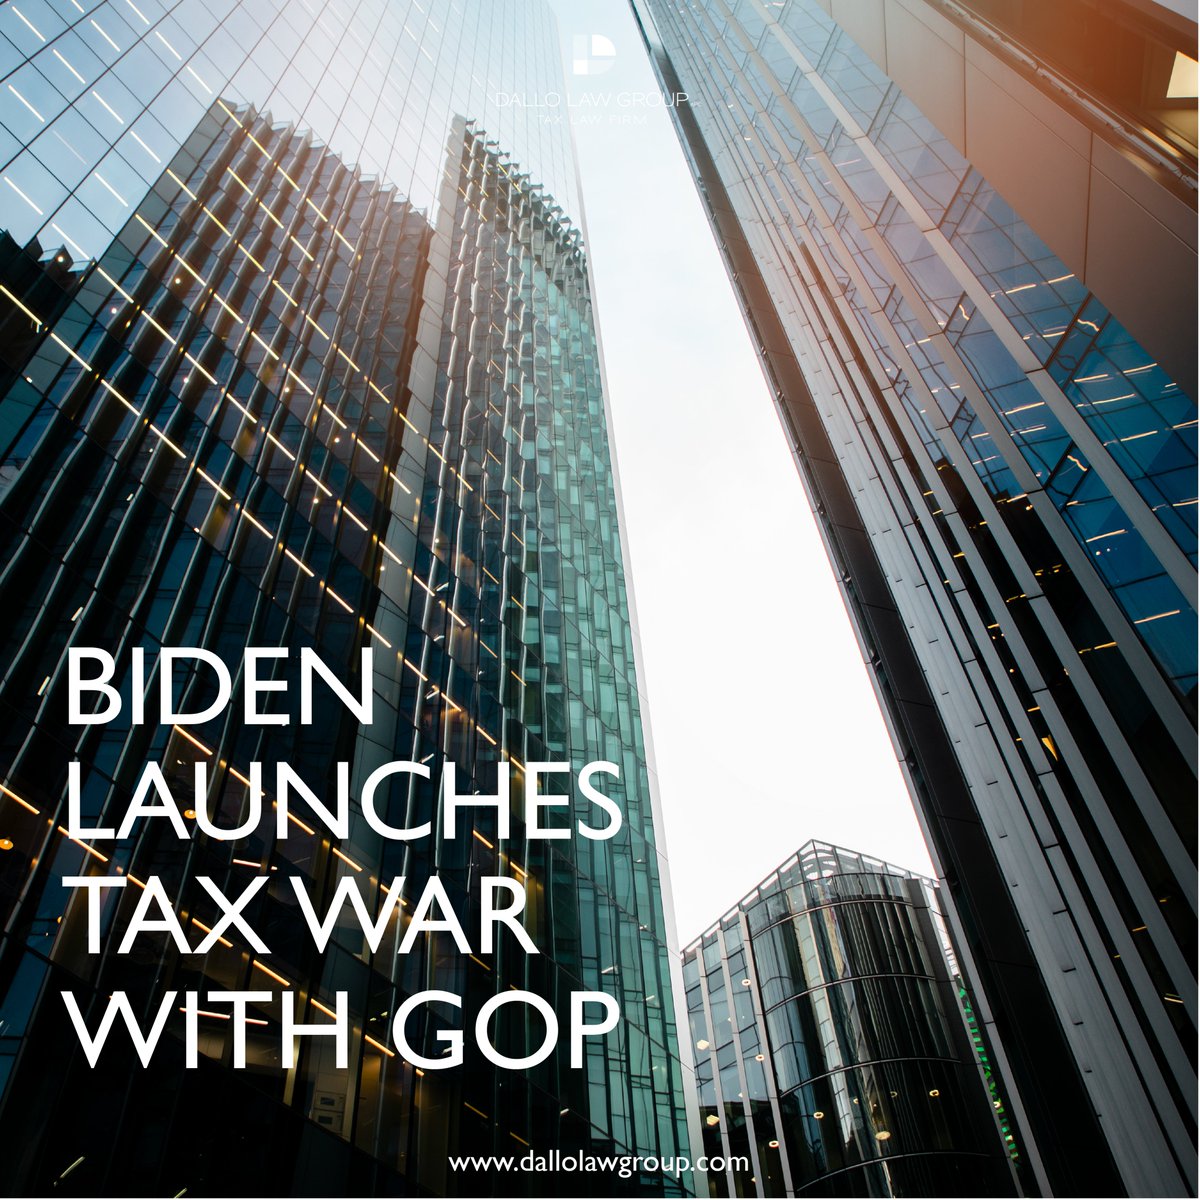 President Biden is proposing tax hikes on the wealthy and big businesses. Stay informed with Dallo Law Group - your expert partner in resolving tax controversies.  Let us bring you Peace Of Mind! 

Call Today! 619-795-8000

#TaxDebtRelief #TaxDispute #TaxAttorney #PeaceOfMind